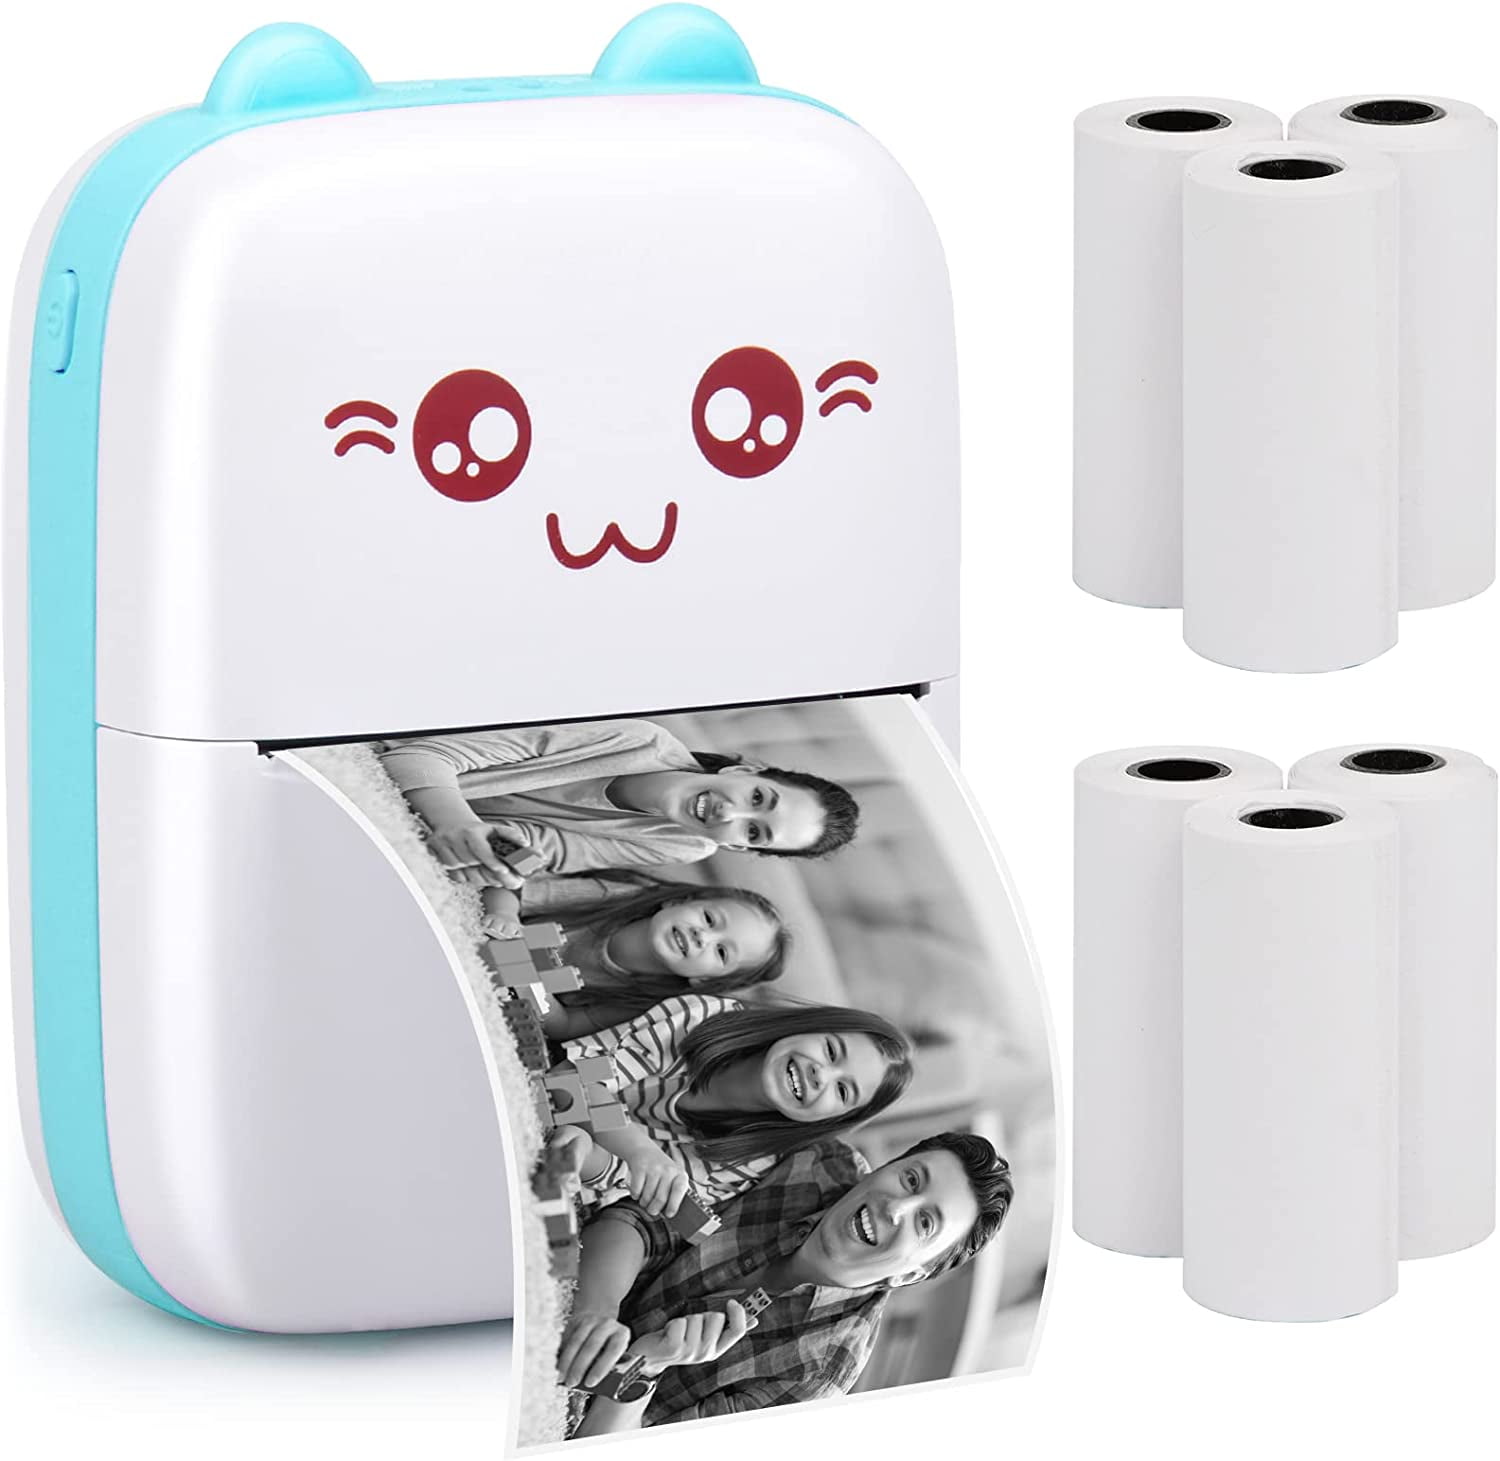 Portable Printer, Mini Pocket Wireless Bluetooth Thermal Printers with 6 Printing Paper for Android Smartphone, BT Printing Gift for Label Receipt Notes Study Home Office, Blue - Walmart.com